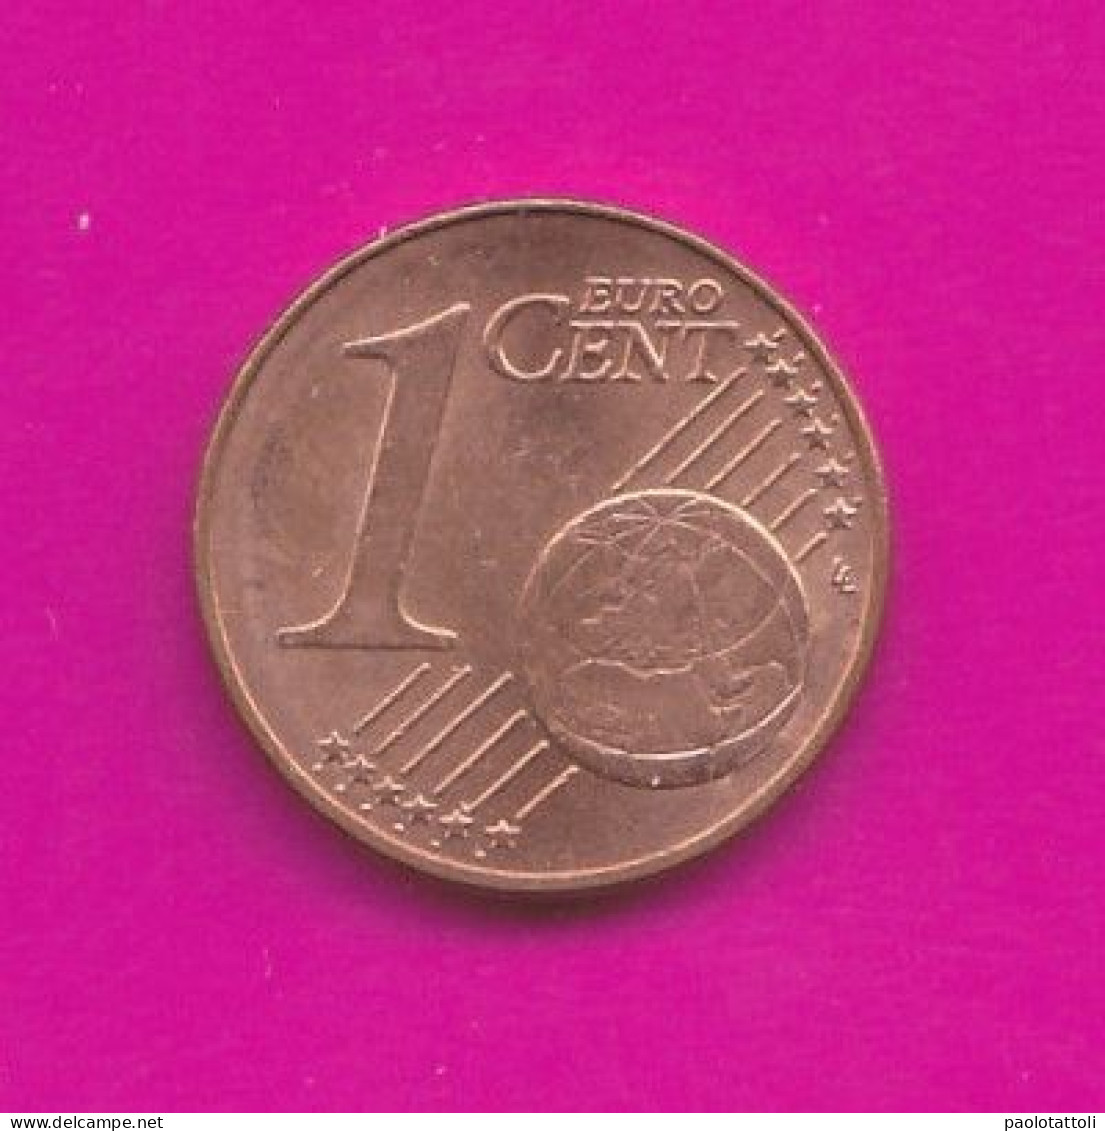 Germany, F 2018- 1 Euro Cent- Mint Of Stoccarda- Copper Plated Steel- Obverse Oak Leaf. Reverse Denomination- - Germania